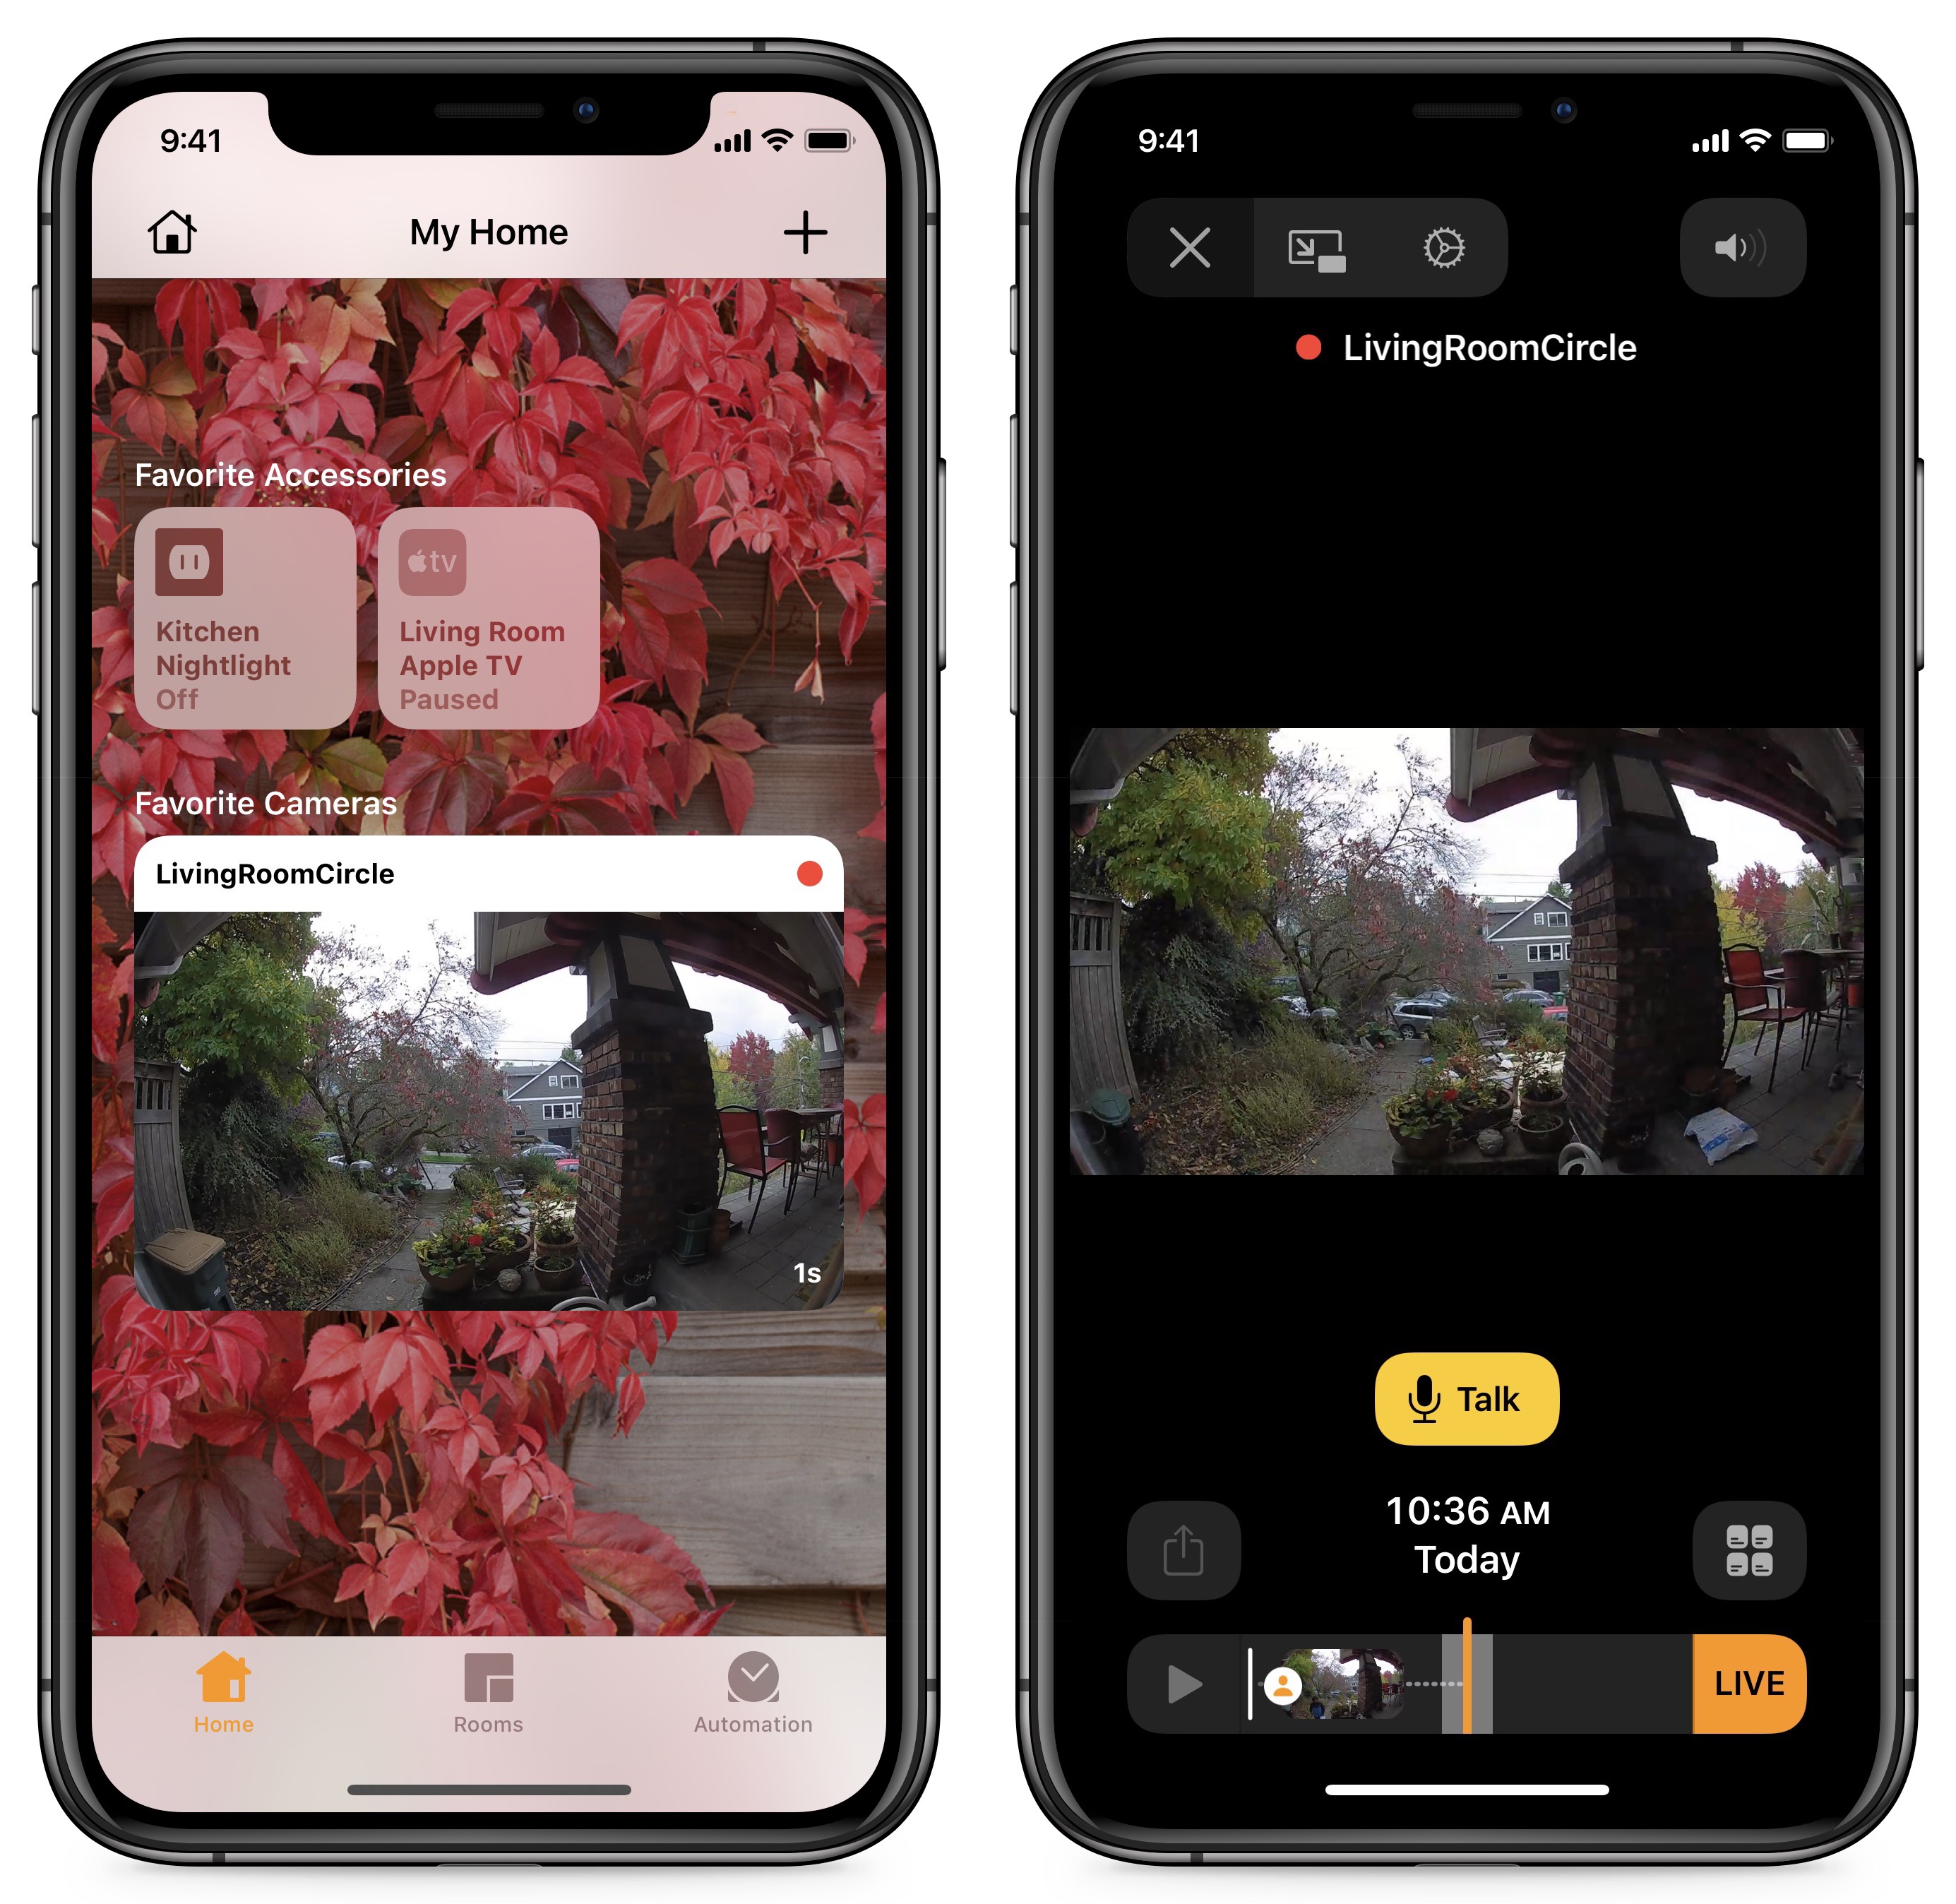 Apple's HomeKit Secure Video Leverages iCloud Storage and Preserves Privacy  - TidBITS